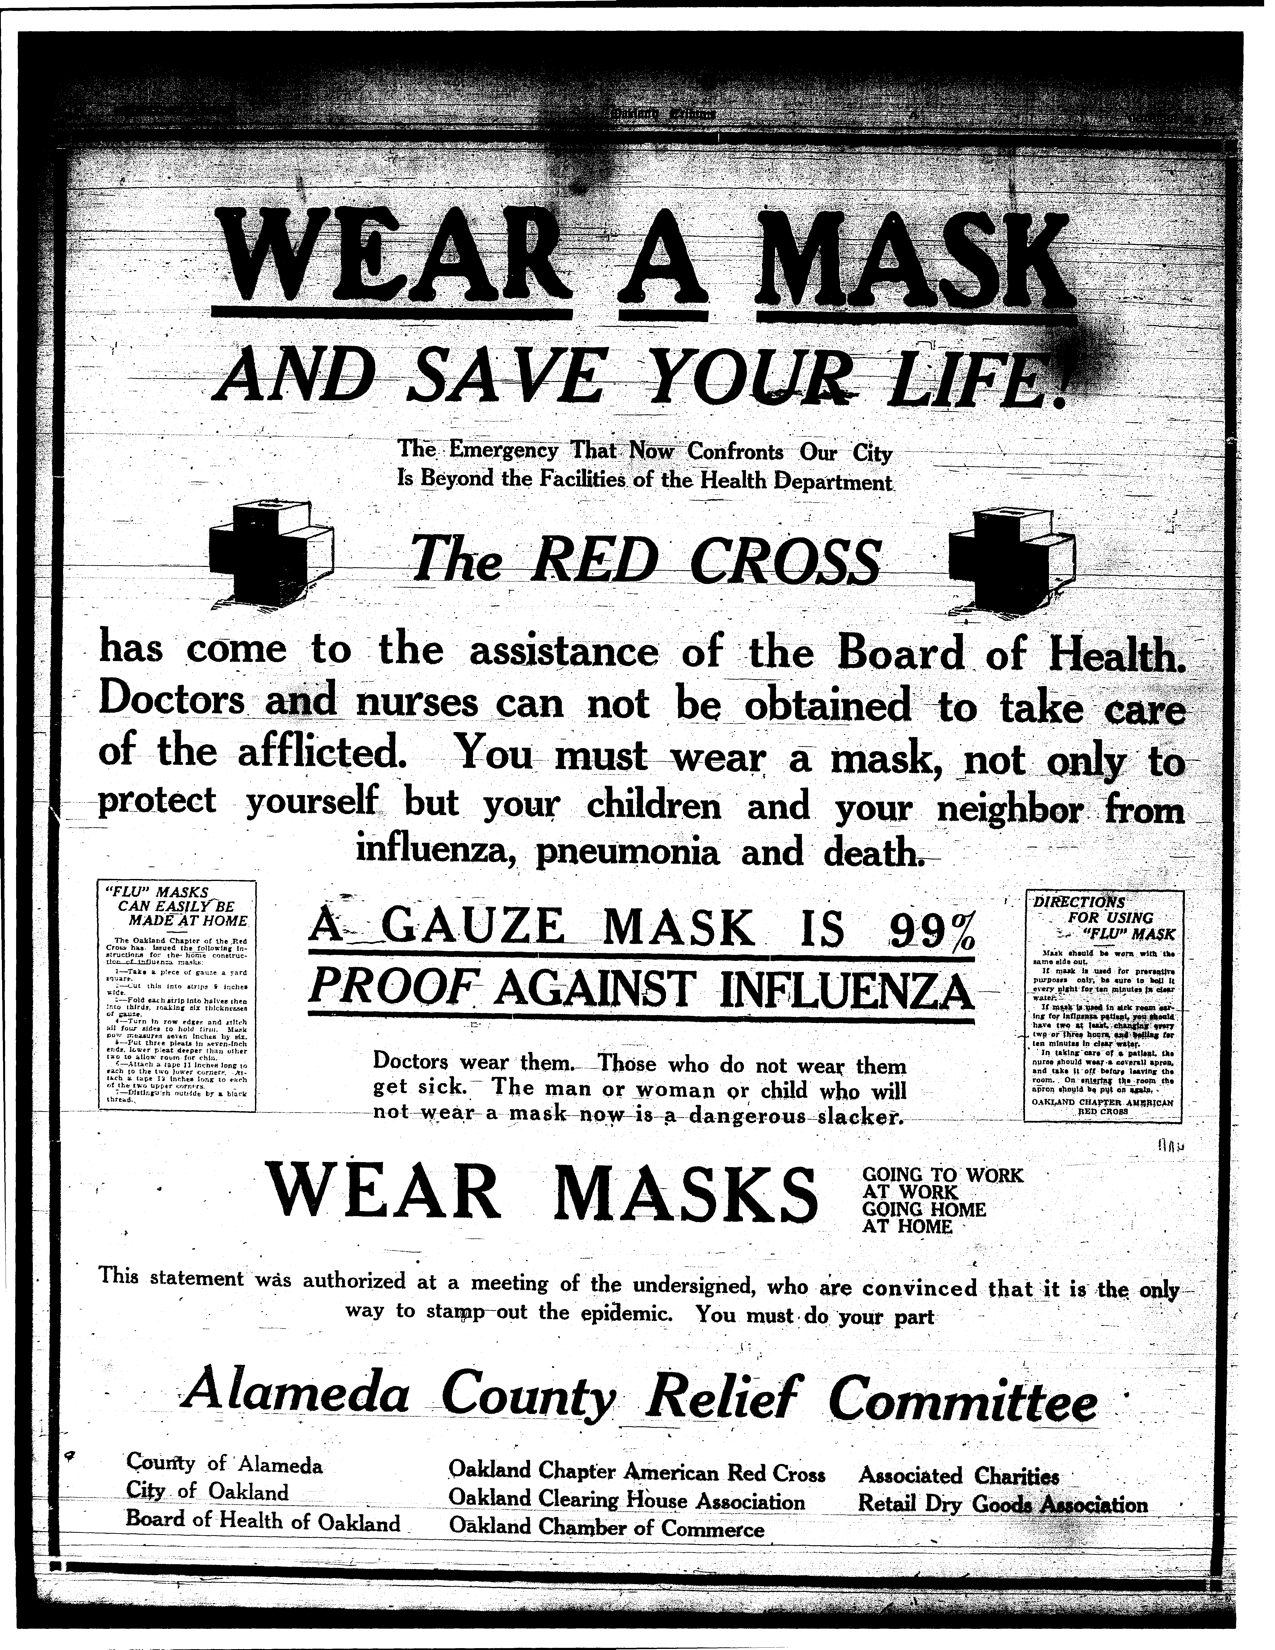 Spanish Flu-era poster from Alameda County, California that says "Wear a Mask and Save Your Life" with other regulations